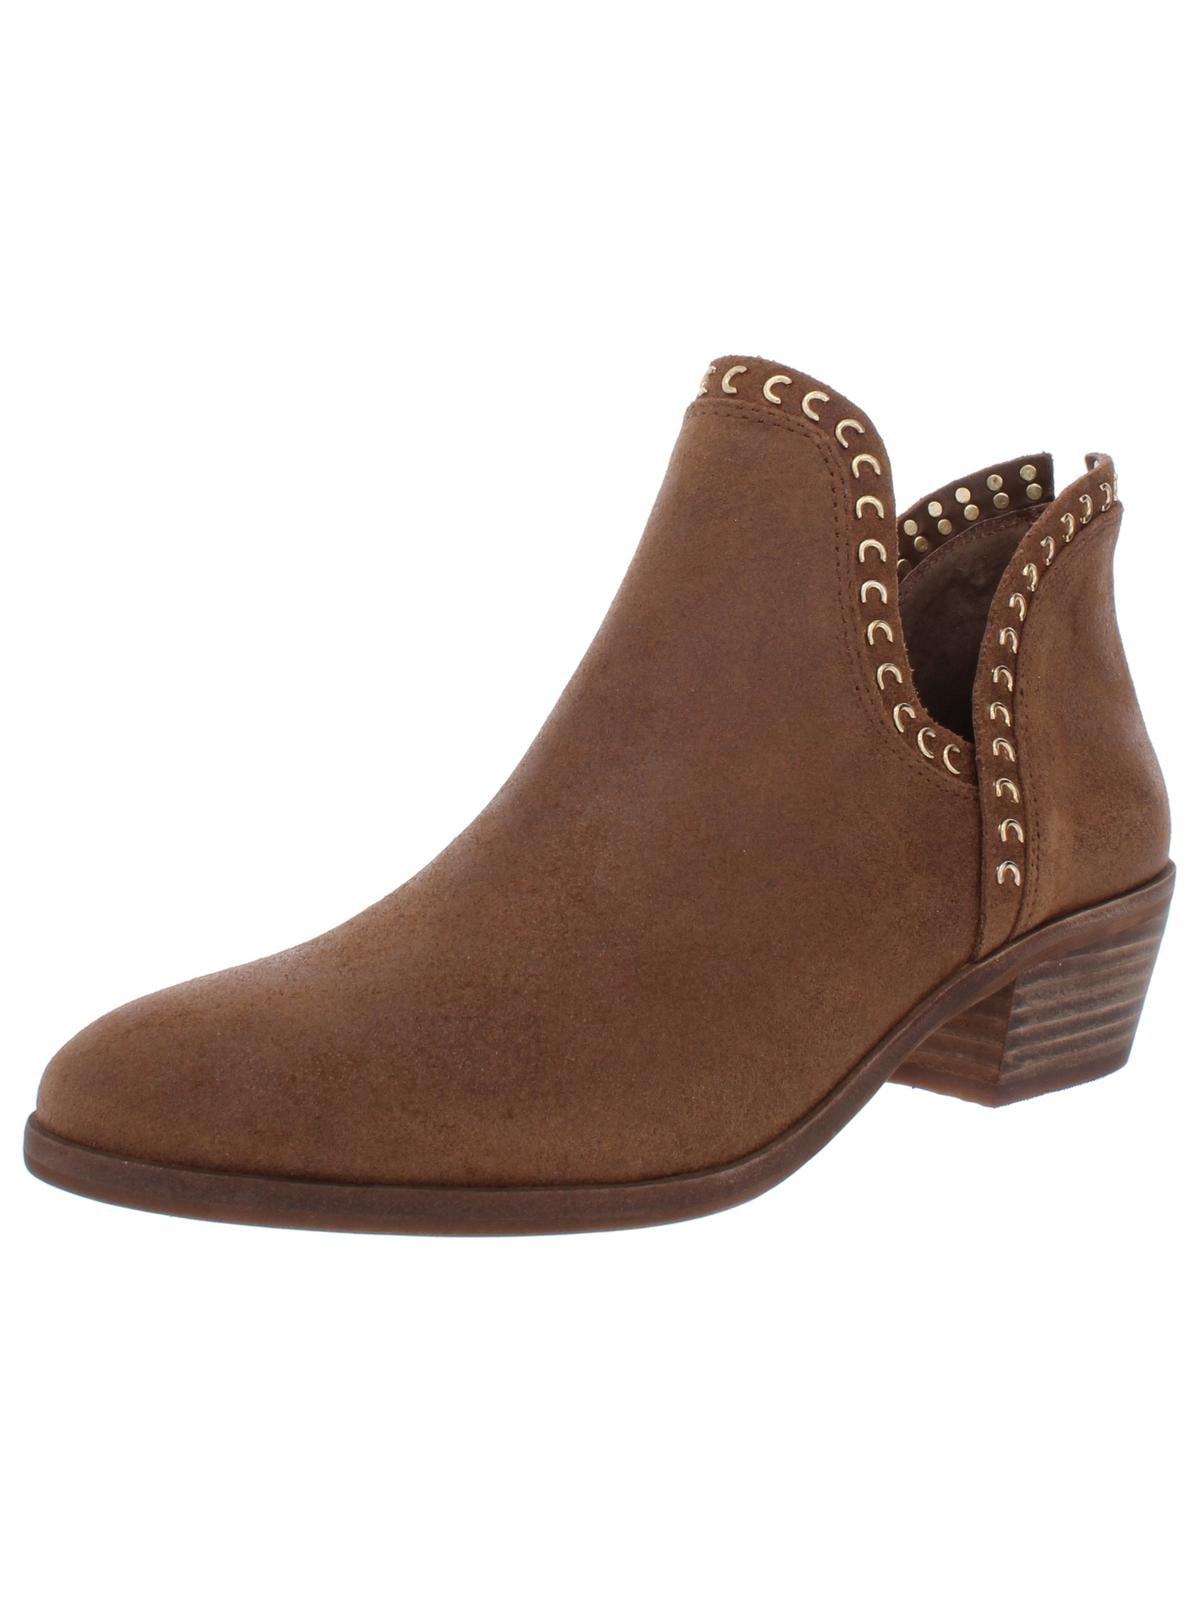 suede cut out ankle boots